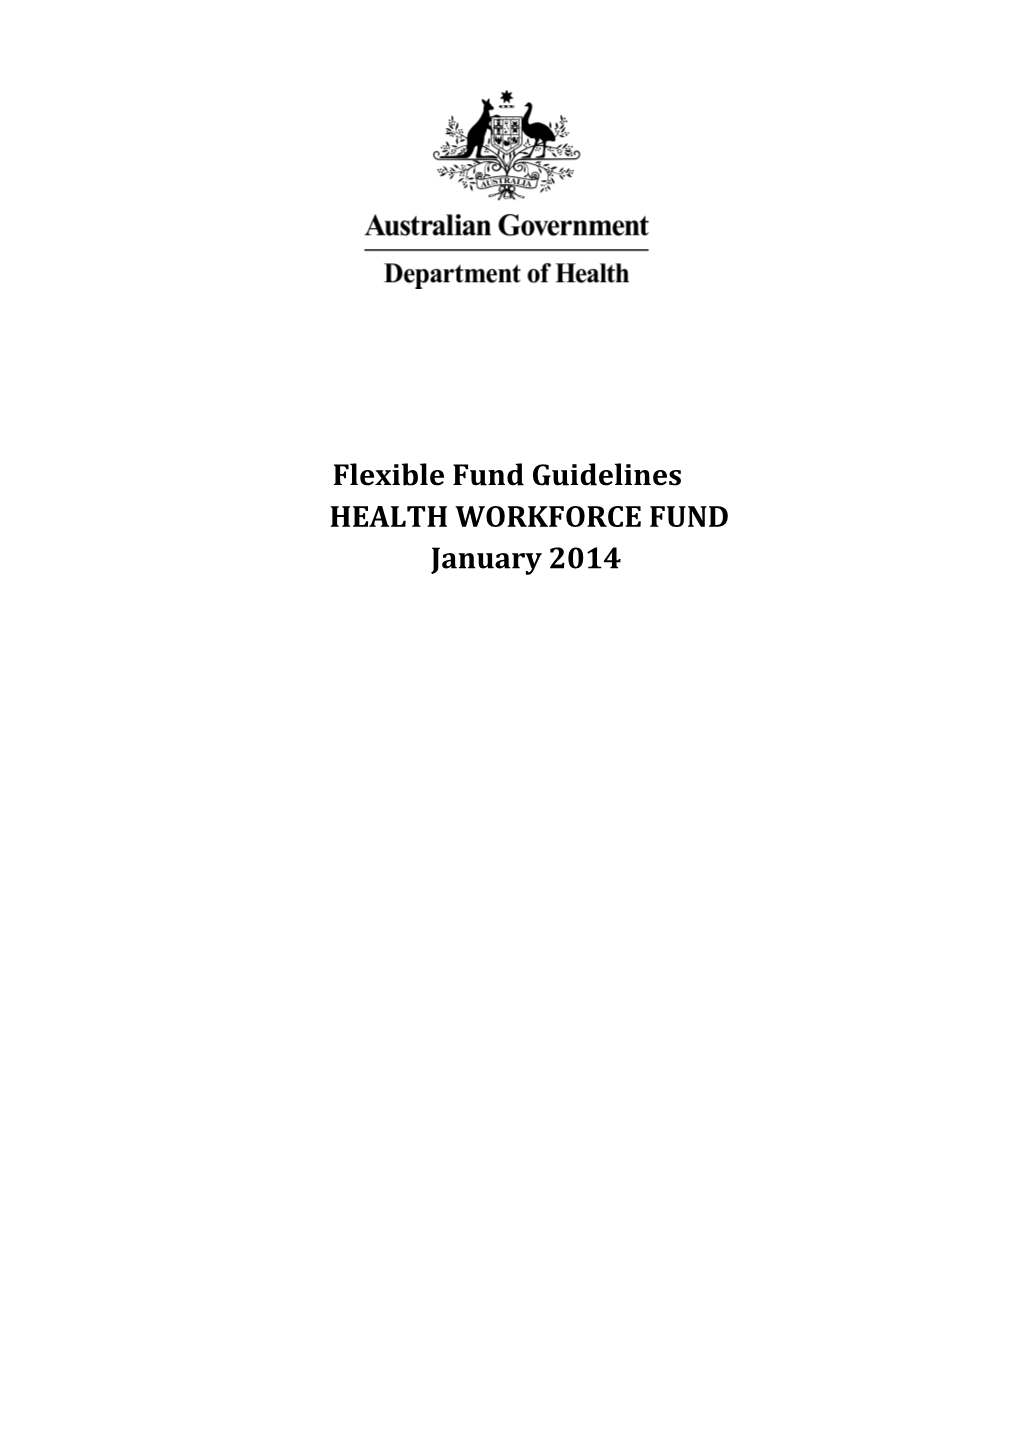 Flexible Fund Guidelines Health Workforce Fund January 2014